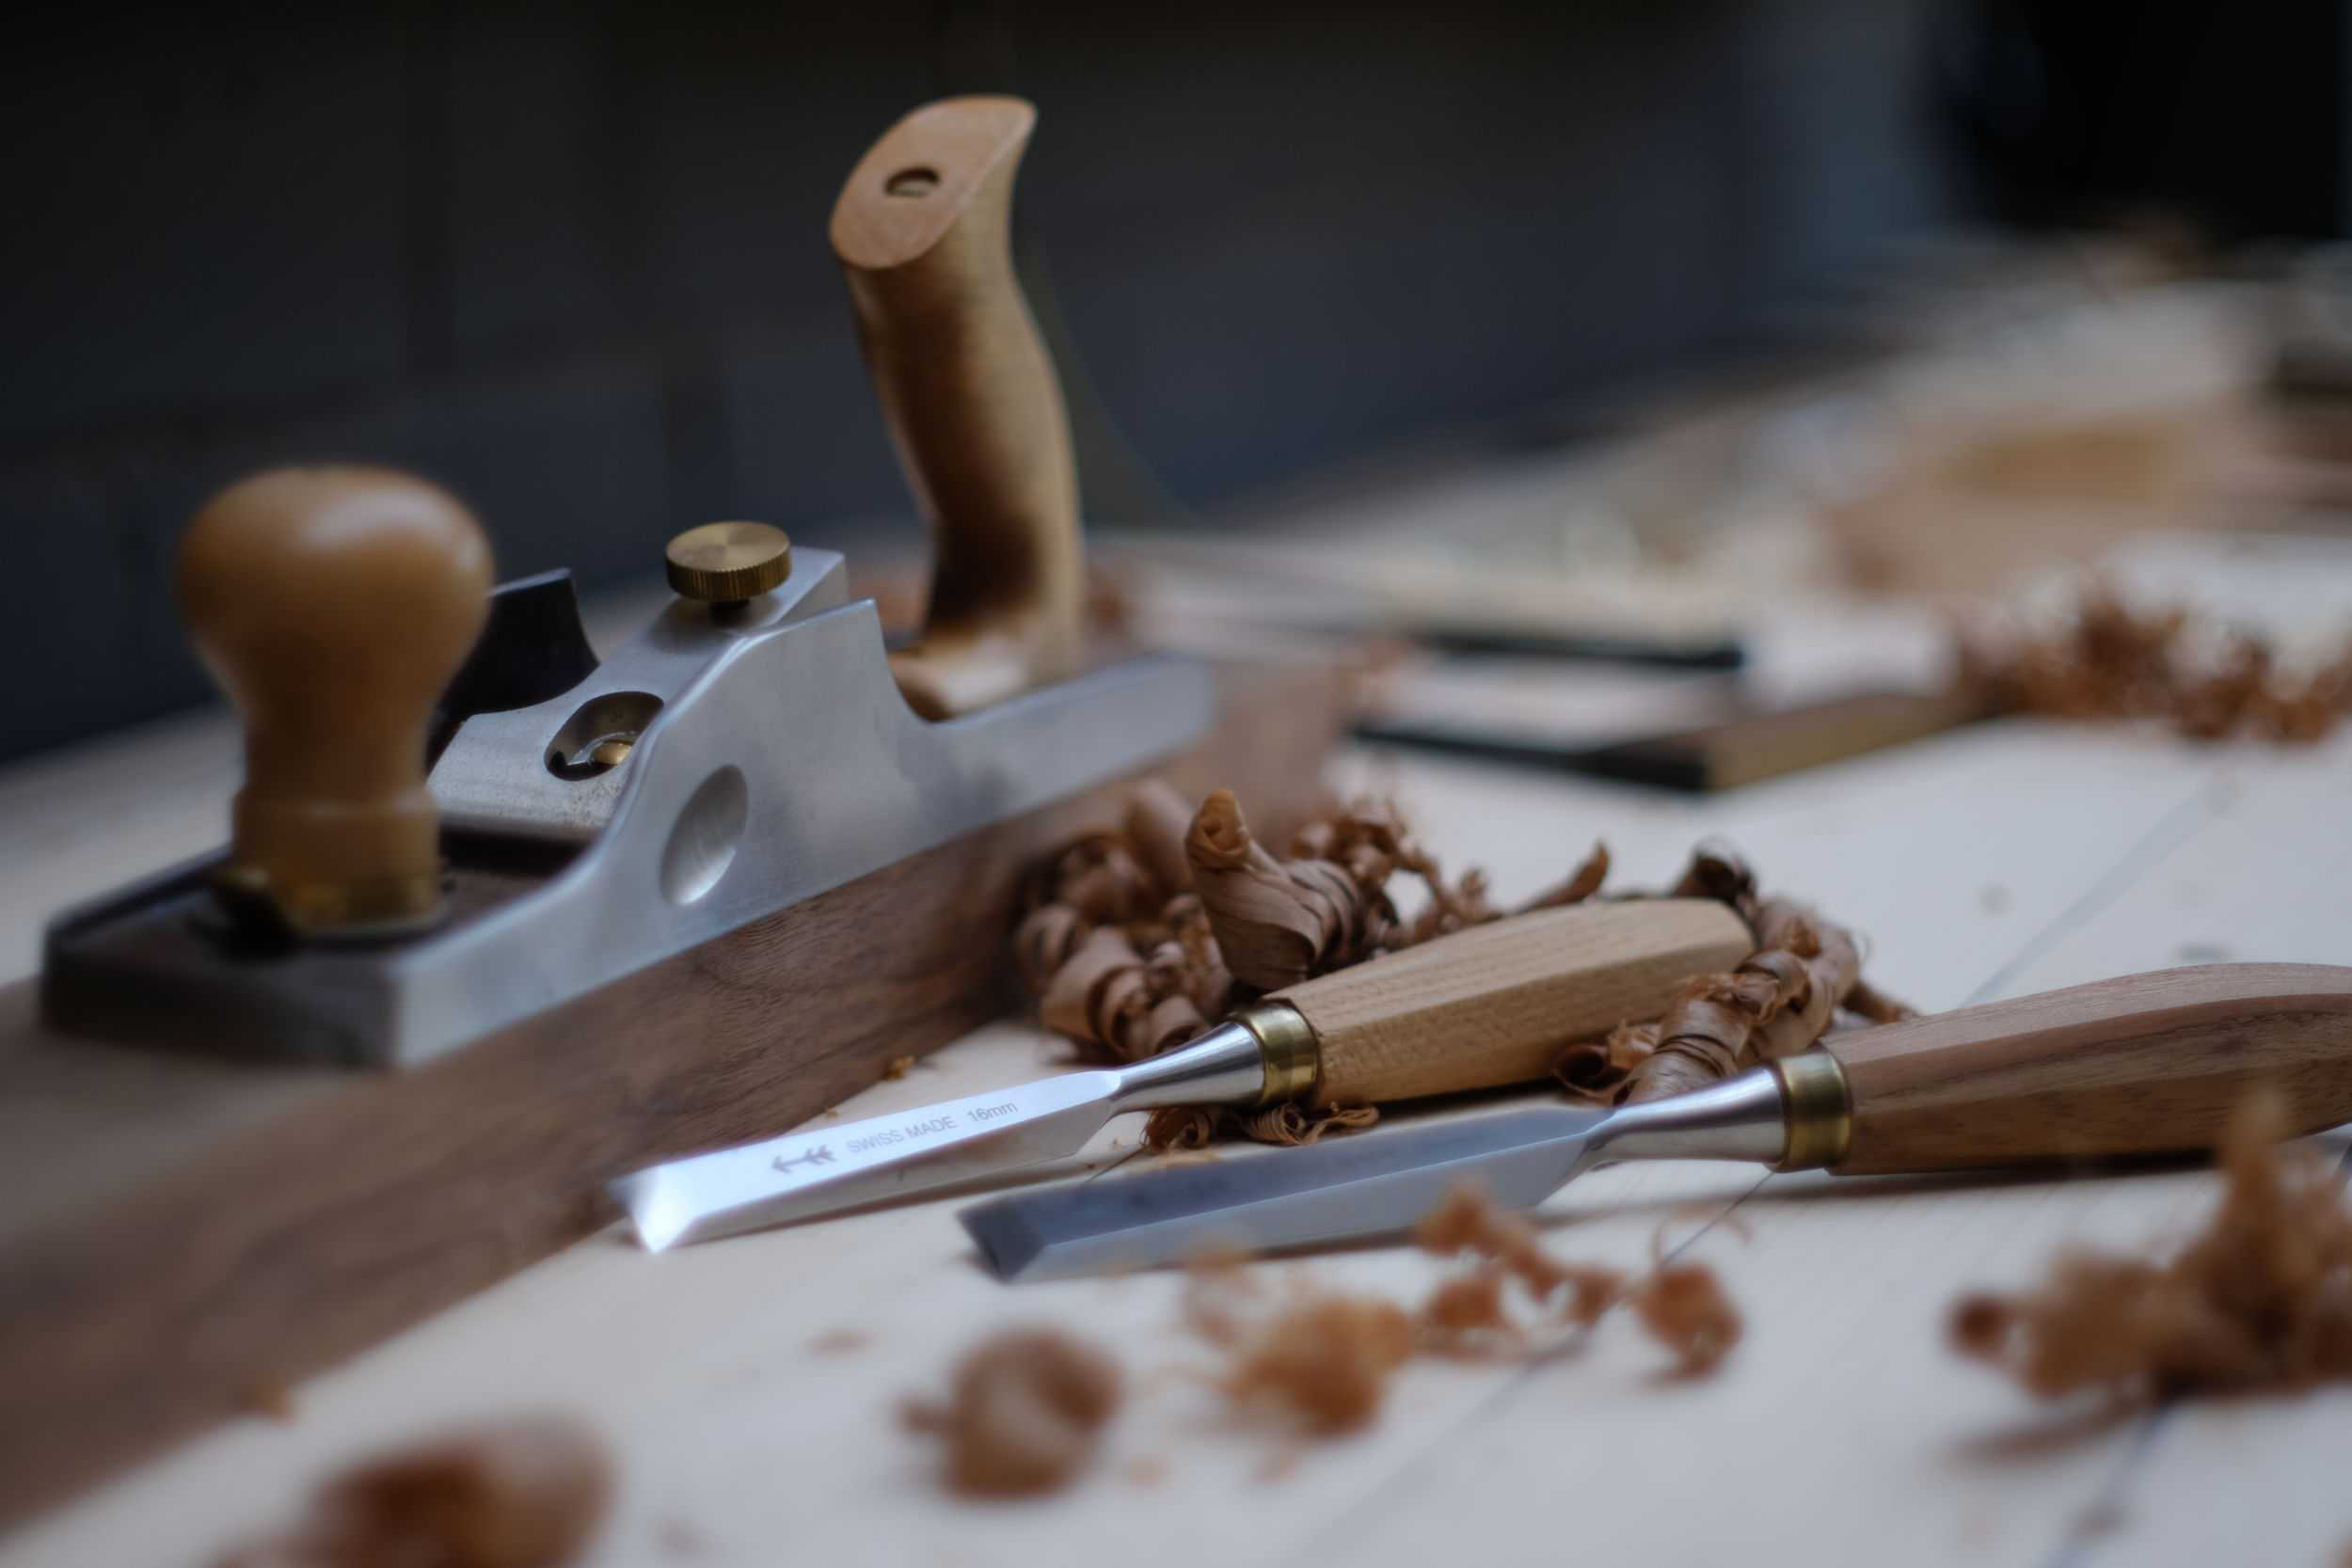 Close-up view of woodworking tools and wood shavings